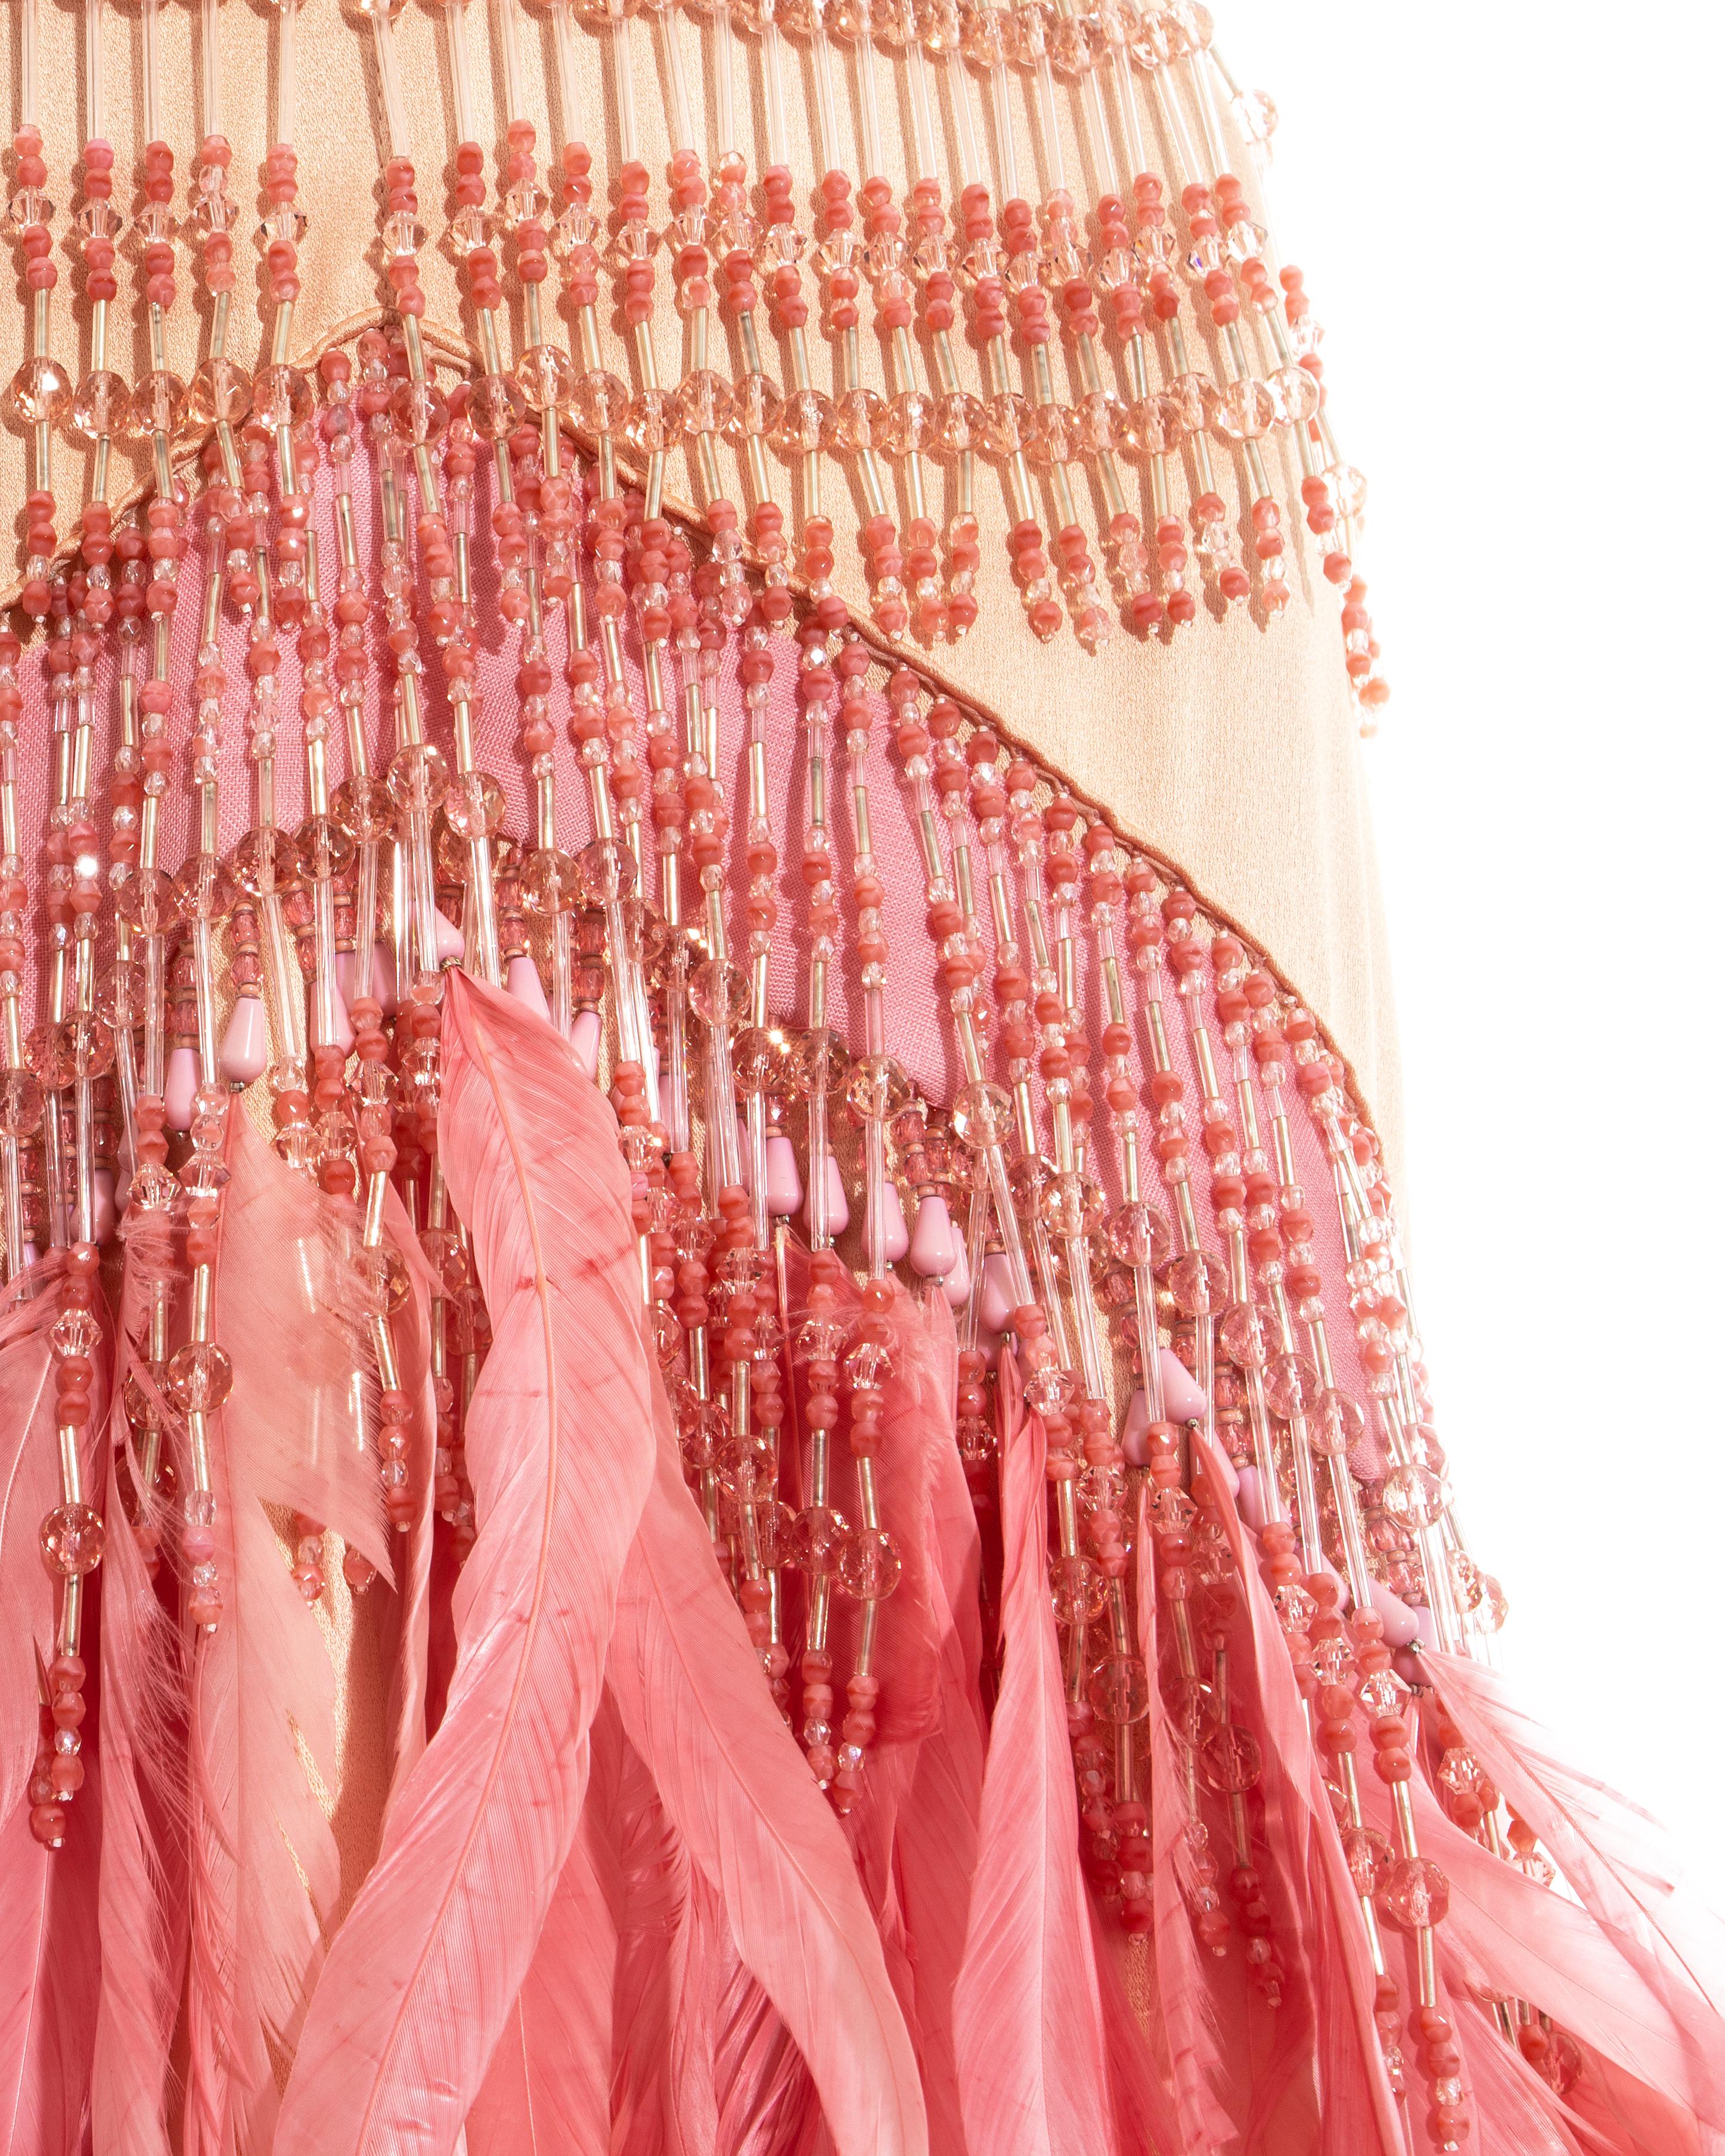 Prada pink crystal and feather fringe bra and skirt ensemble, fw 2017 For Sale 1